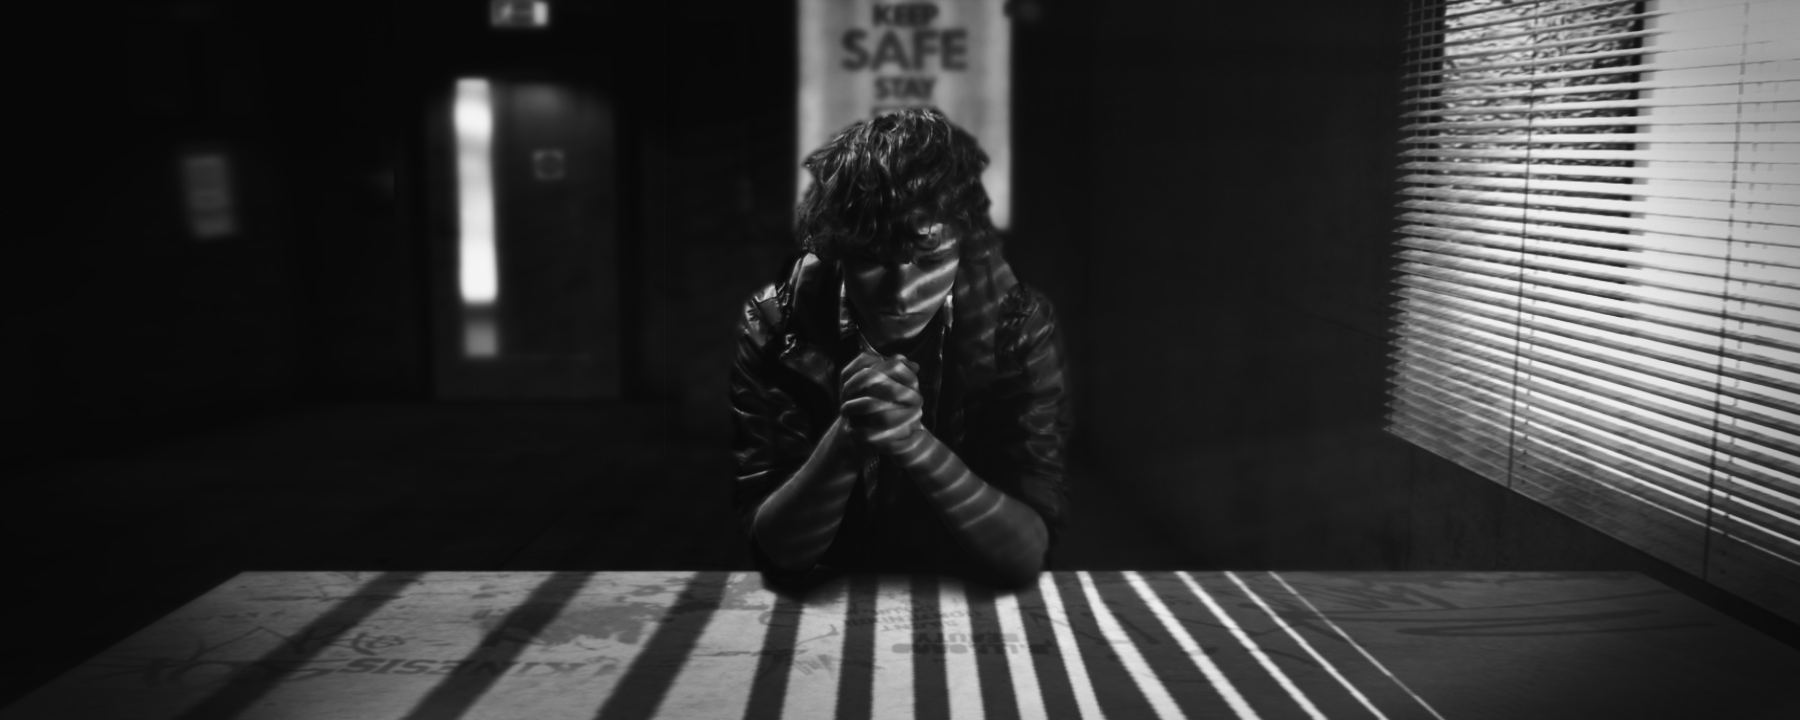 A person sitting with their hands clasped at a table in a dark room with the shutters down. The light is casting shadows on them.